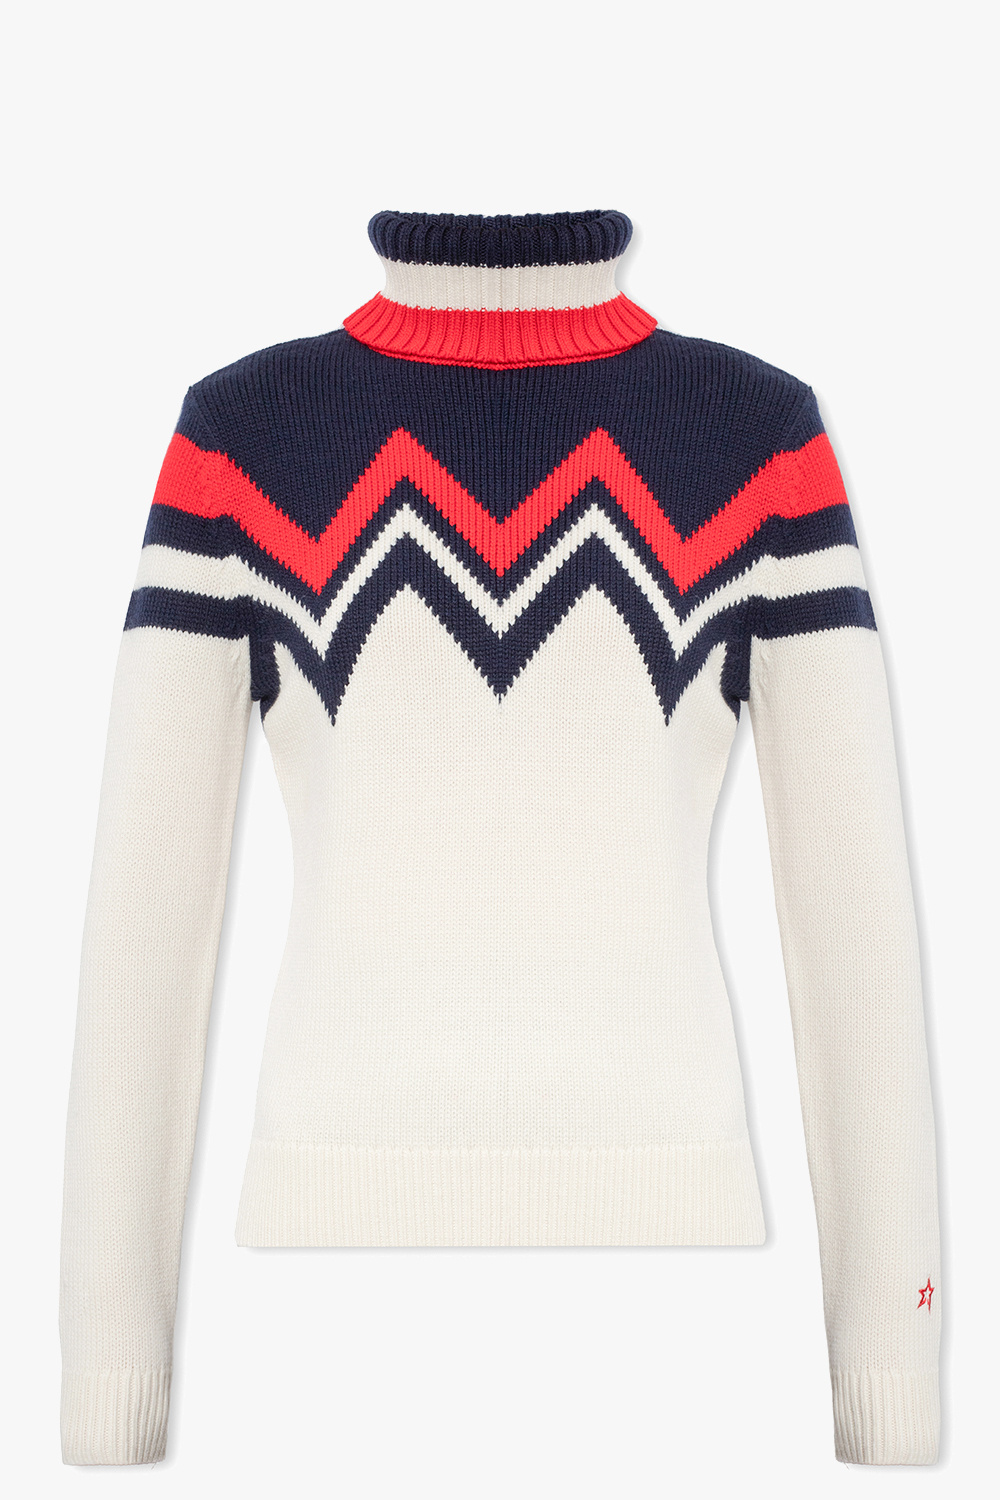 Perfect Moment Wool turtleneck sweater